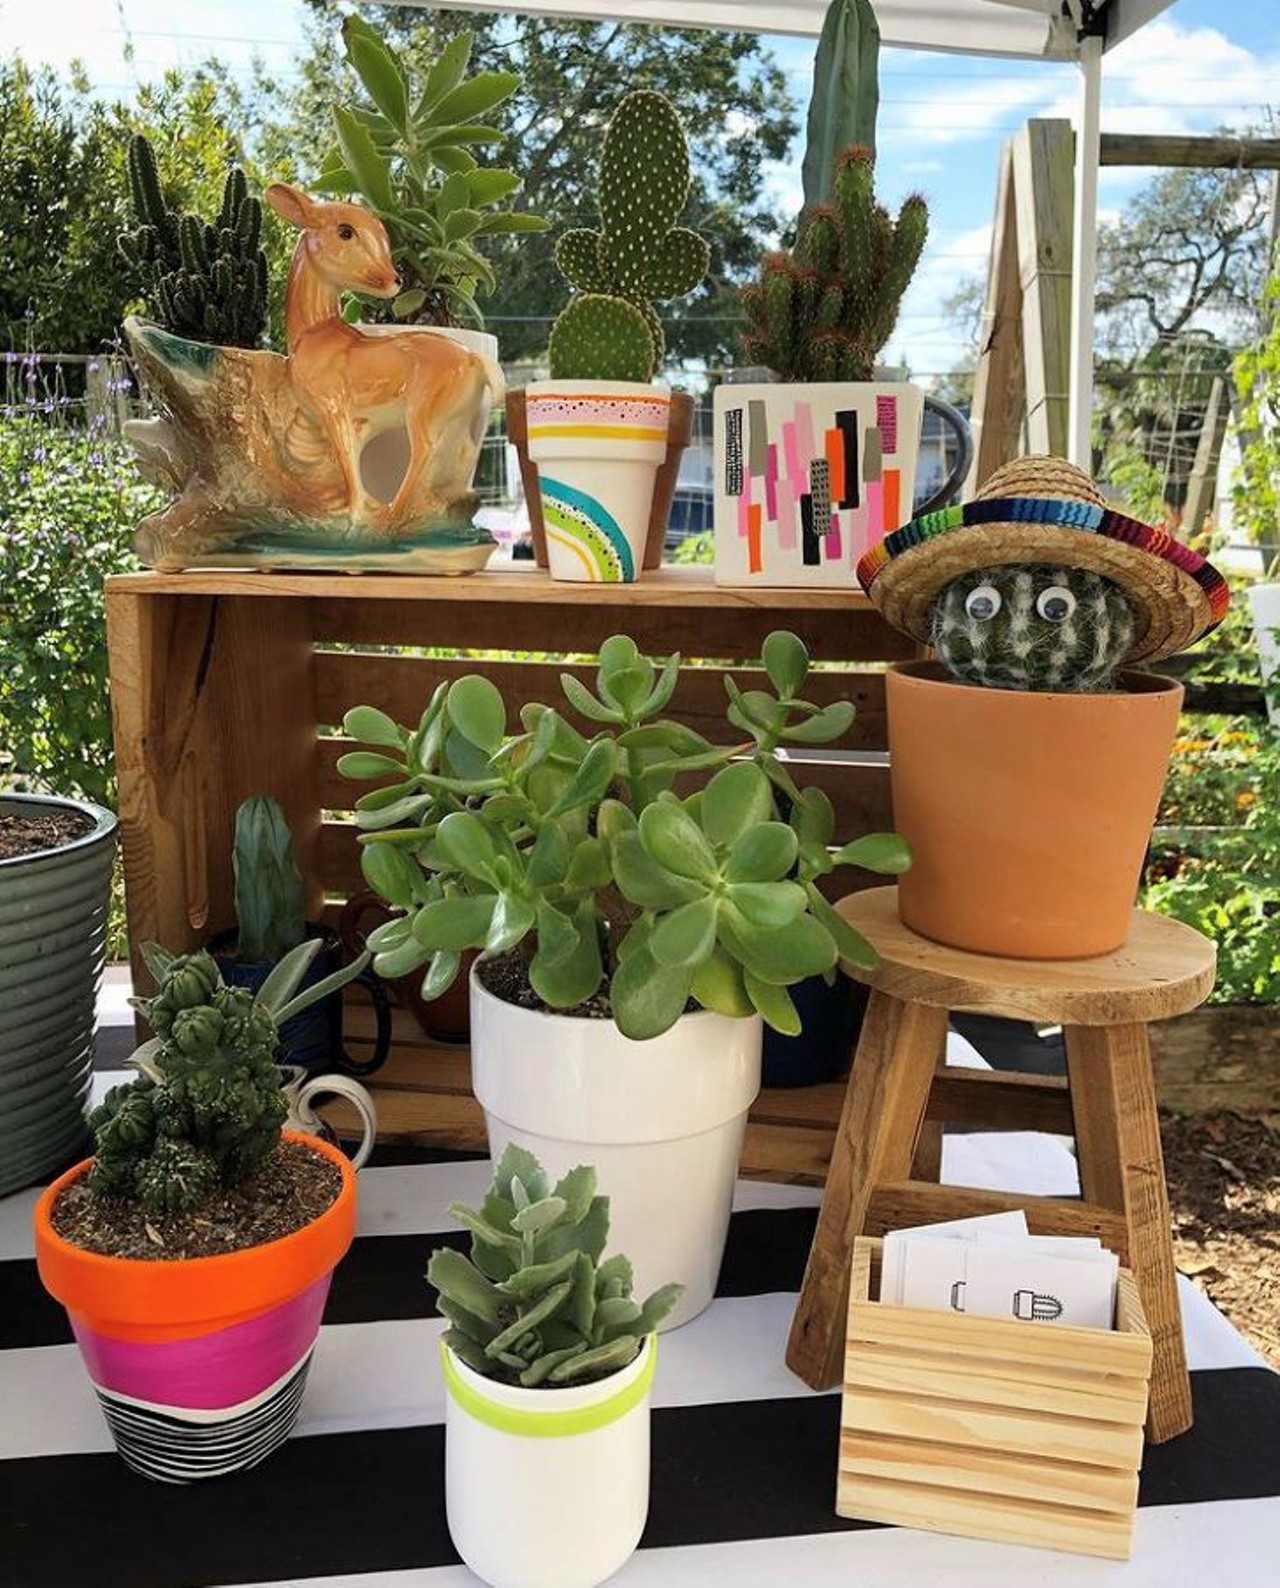 Galentine&#146;s Day with Ouch. Plants that Hurt. and Echoes of Retro 
Echoes of Retro, 627 Virginia Drive
Celebrate Galentine&#146;s Day on Feb. 13 from 2-5 p.m., surrounded by cute plants, vintage clothes, and complimentary cocktails.
Photo via Ouch.Plants that Hurt/Instagram